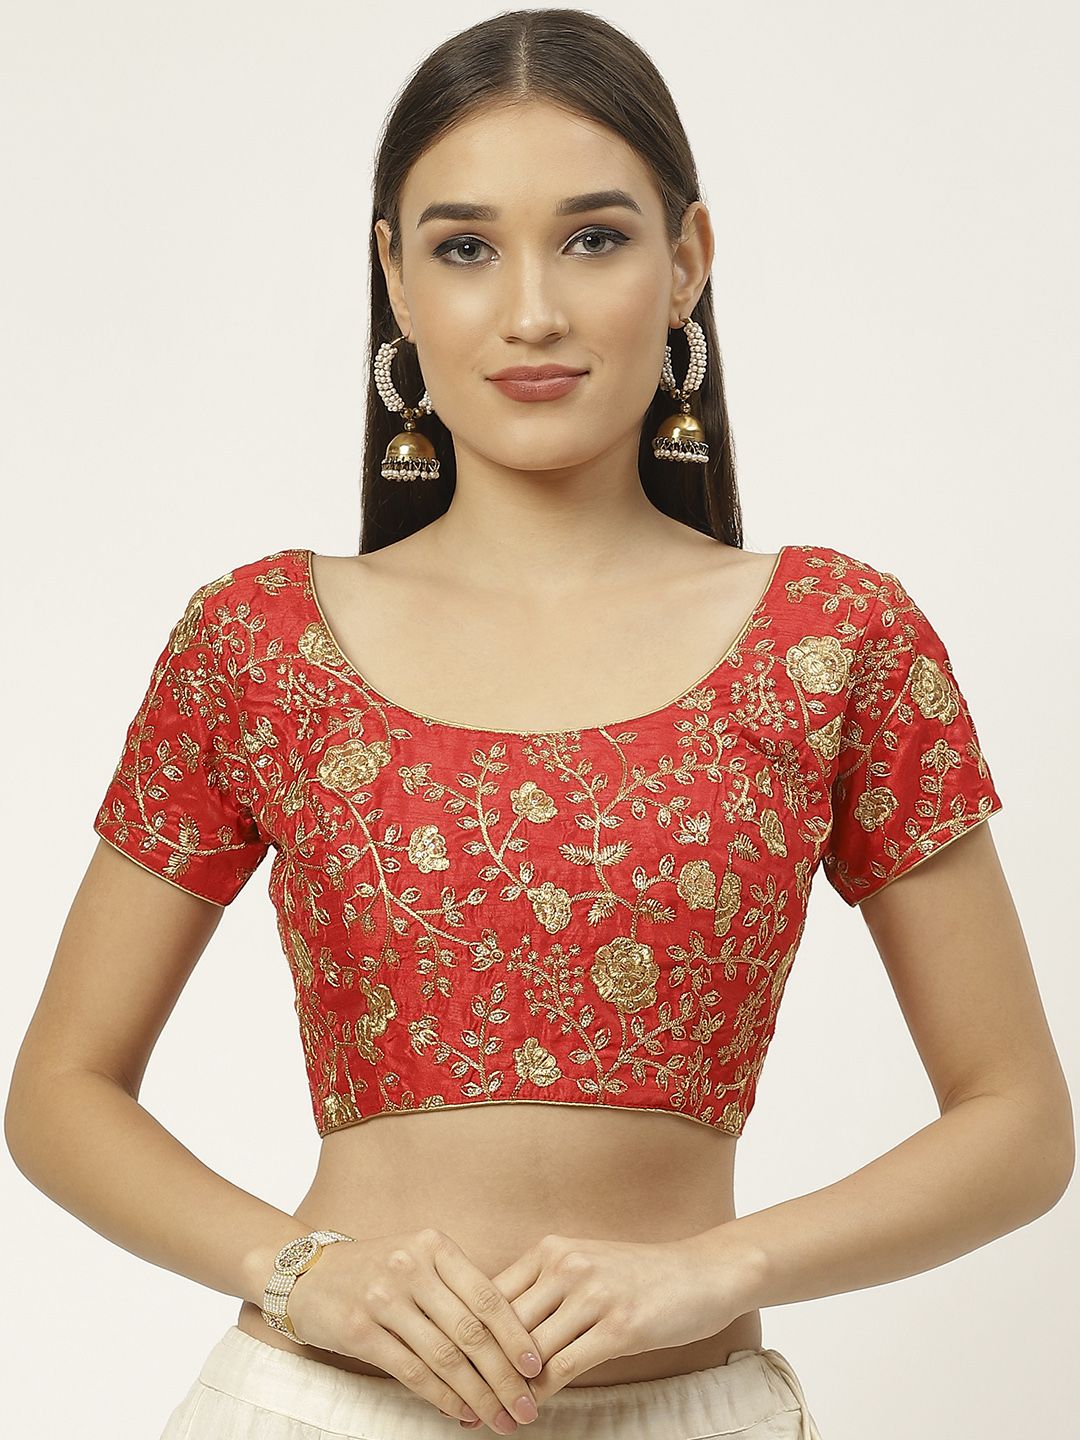 Studio Shringaar Women Red & Golden Embroidered Saree Blouse With Sequins Price in India